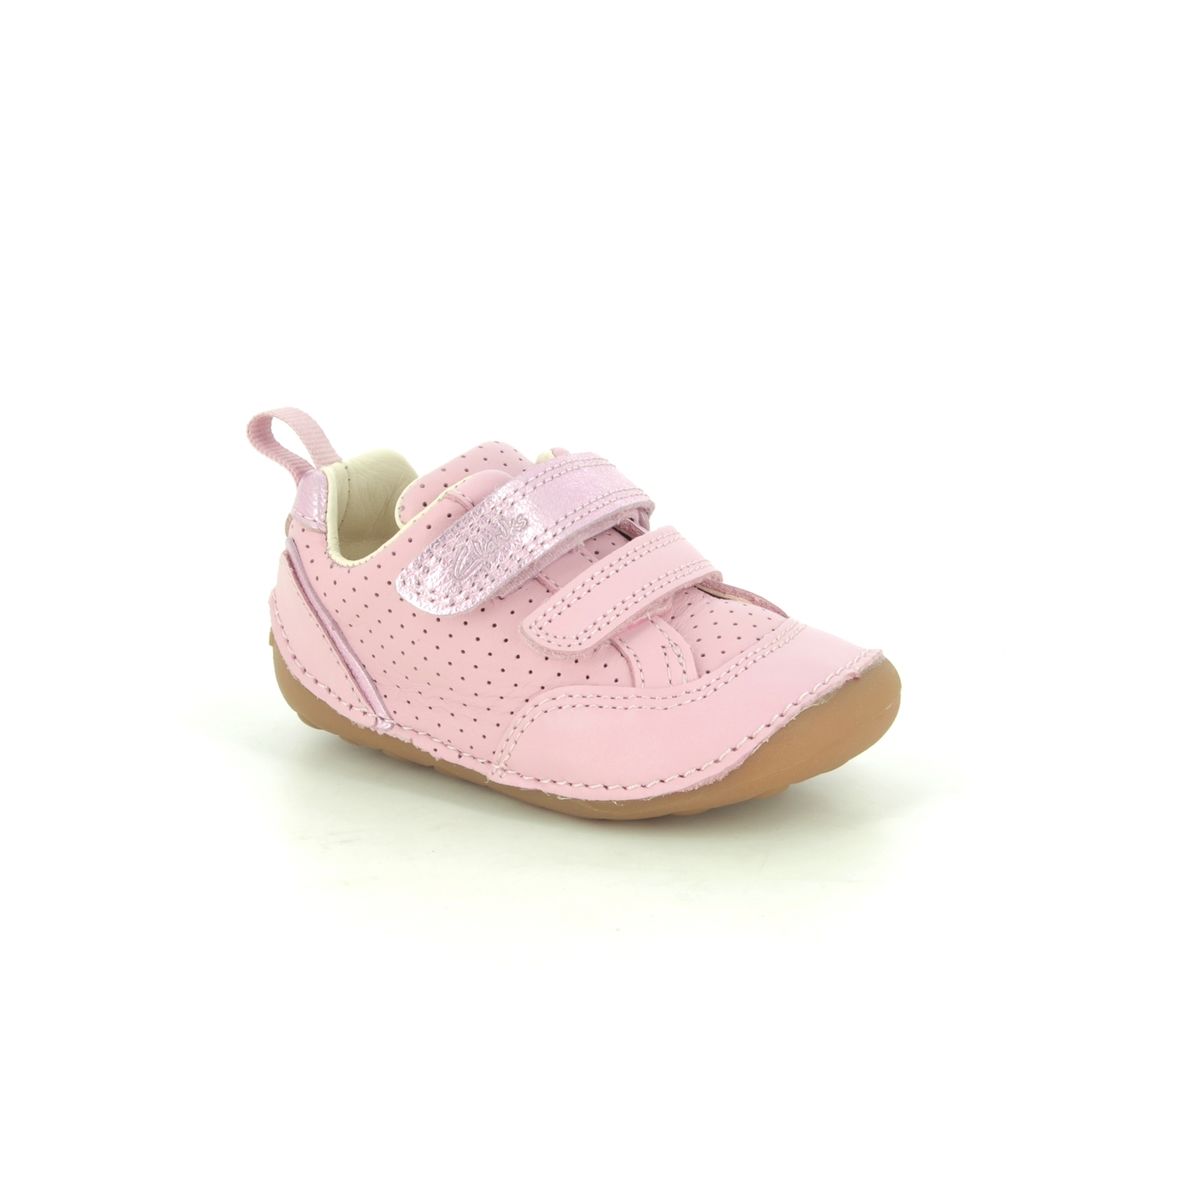 Clarks Tiny Sky T Pink Leather Kids Girls First And Baby Shoes 576286F In Size 2.5 In Plain Pink Leather F Width Fitting Regular Fit For kids